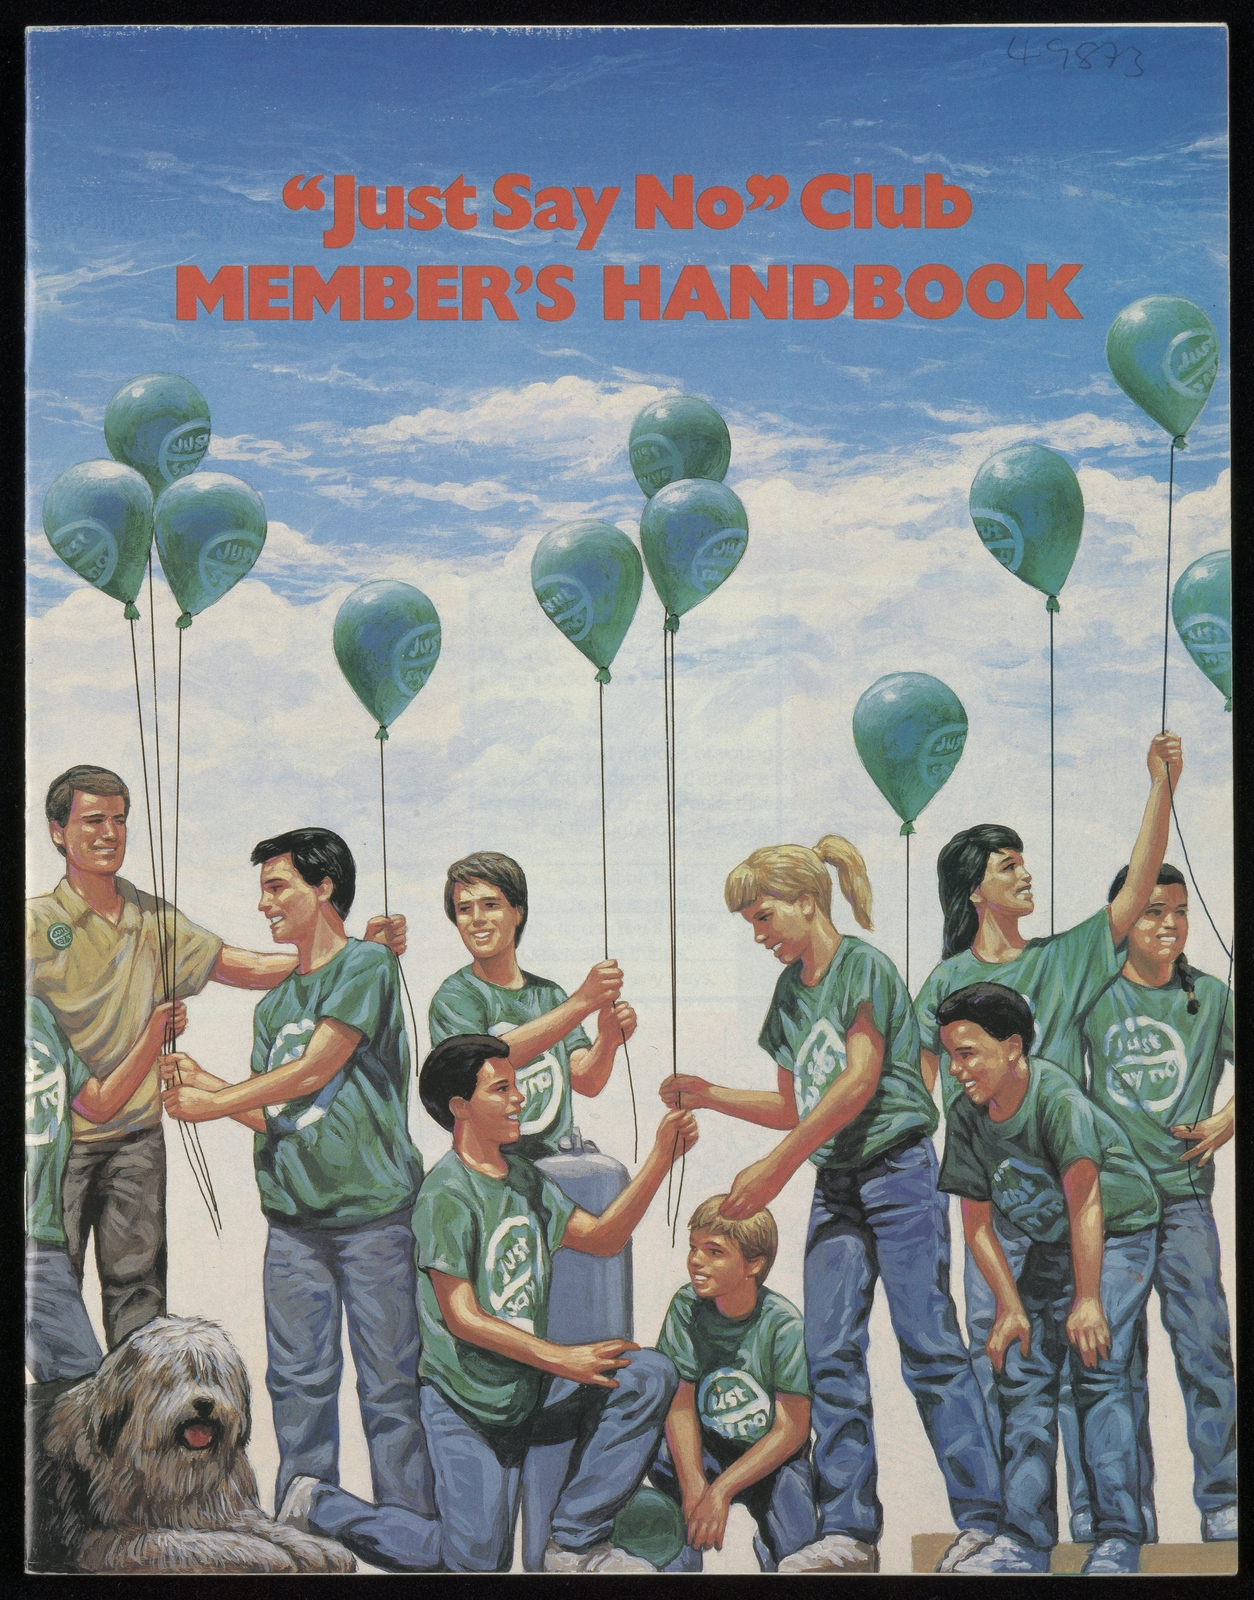 The front cover of the Just Say No Club handbook featuring an illustration of young children, all wearing blue jeans and green t-shirts, holding balloons with the Just Say No logo on them.